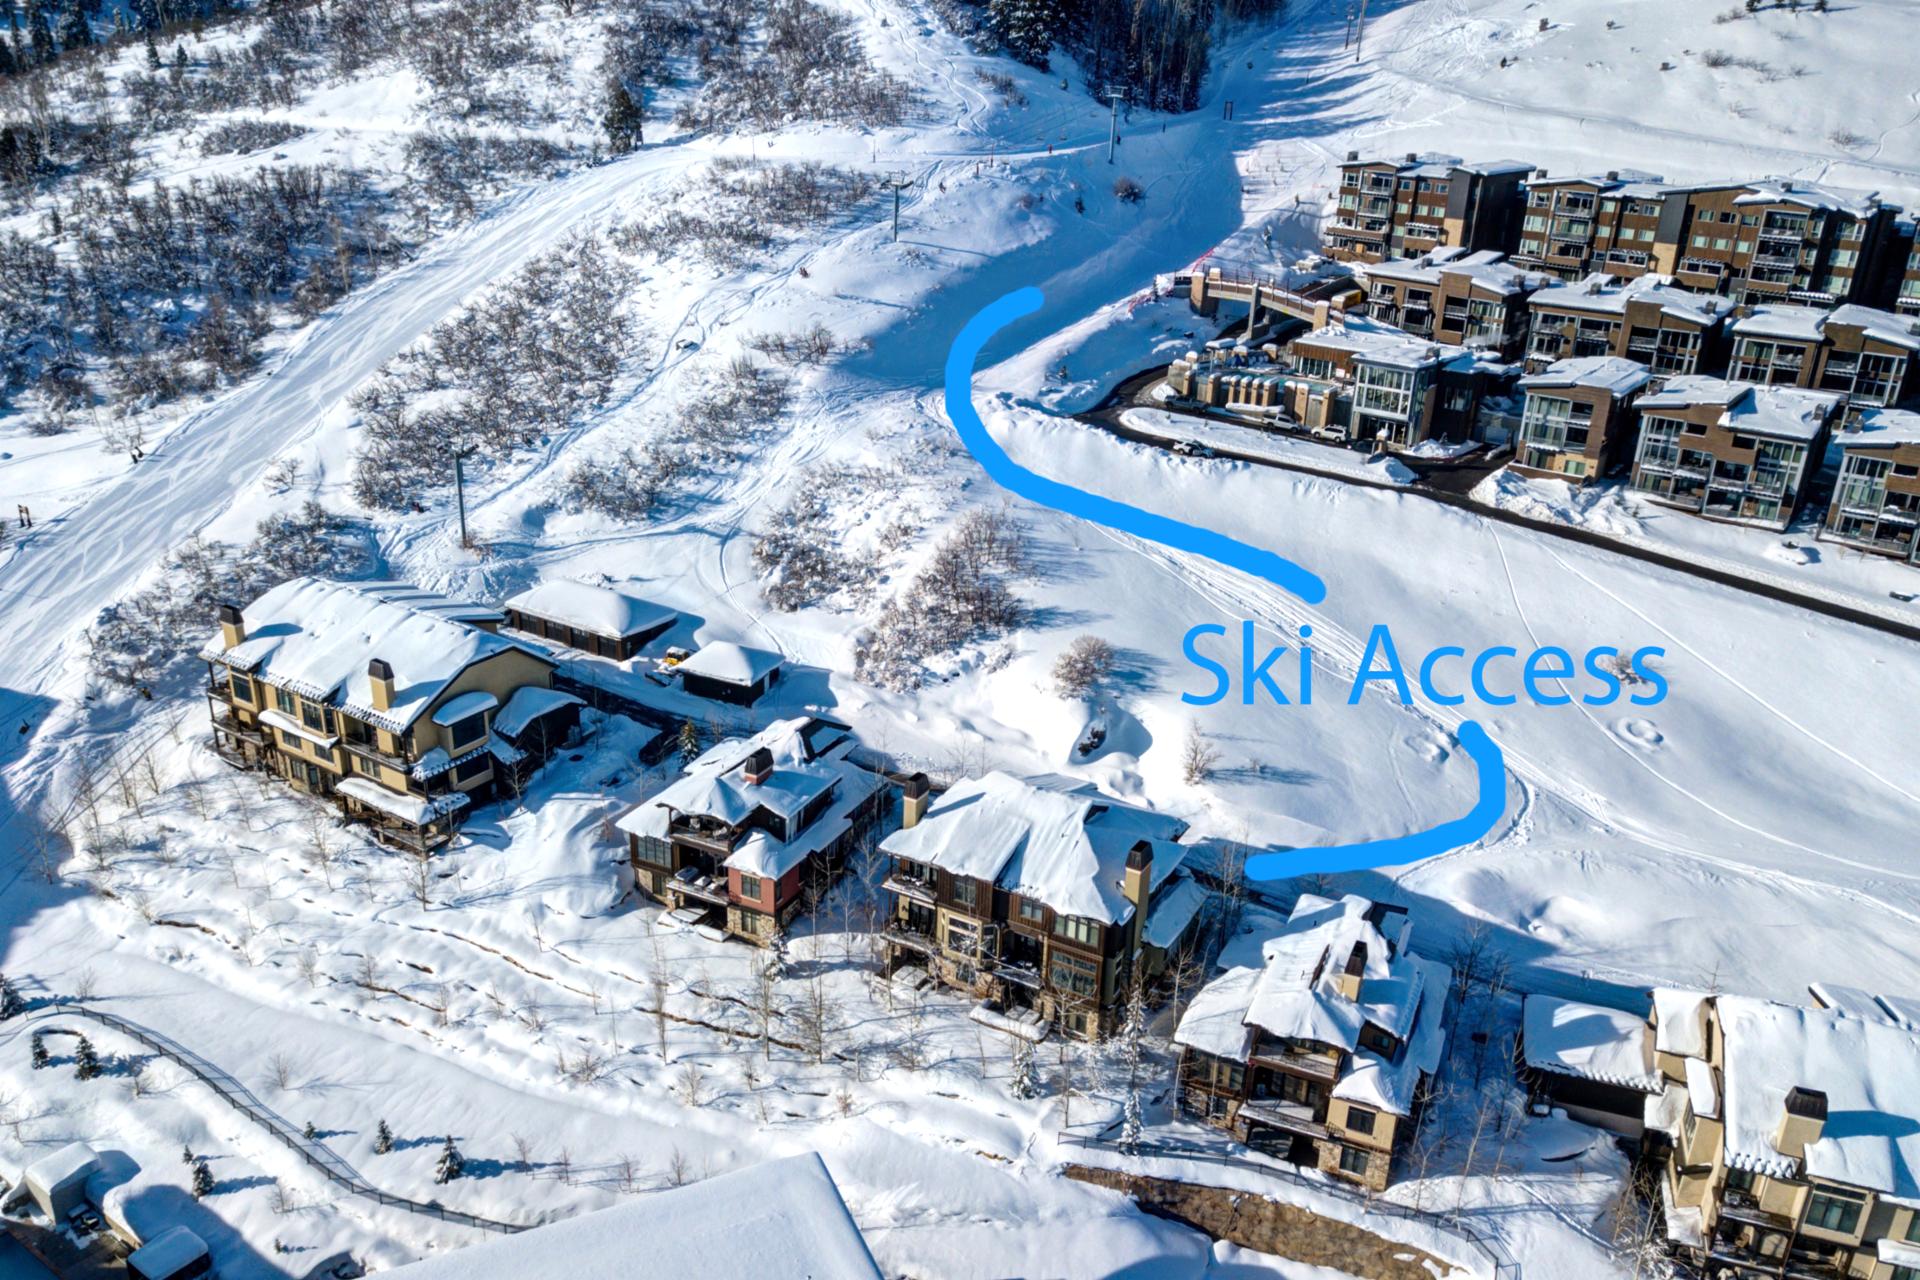 Ski Access back to the property